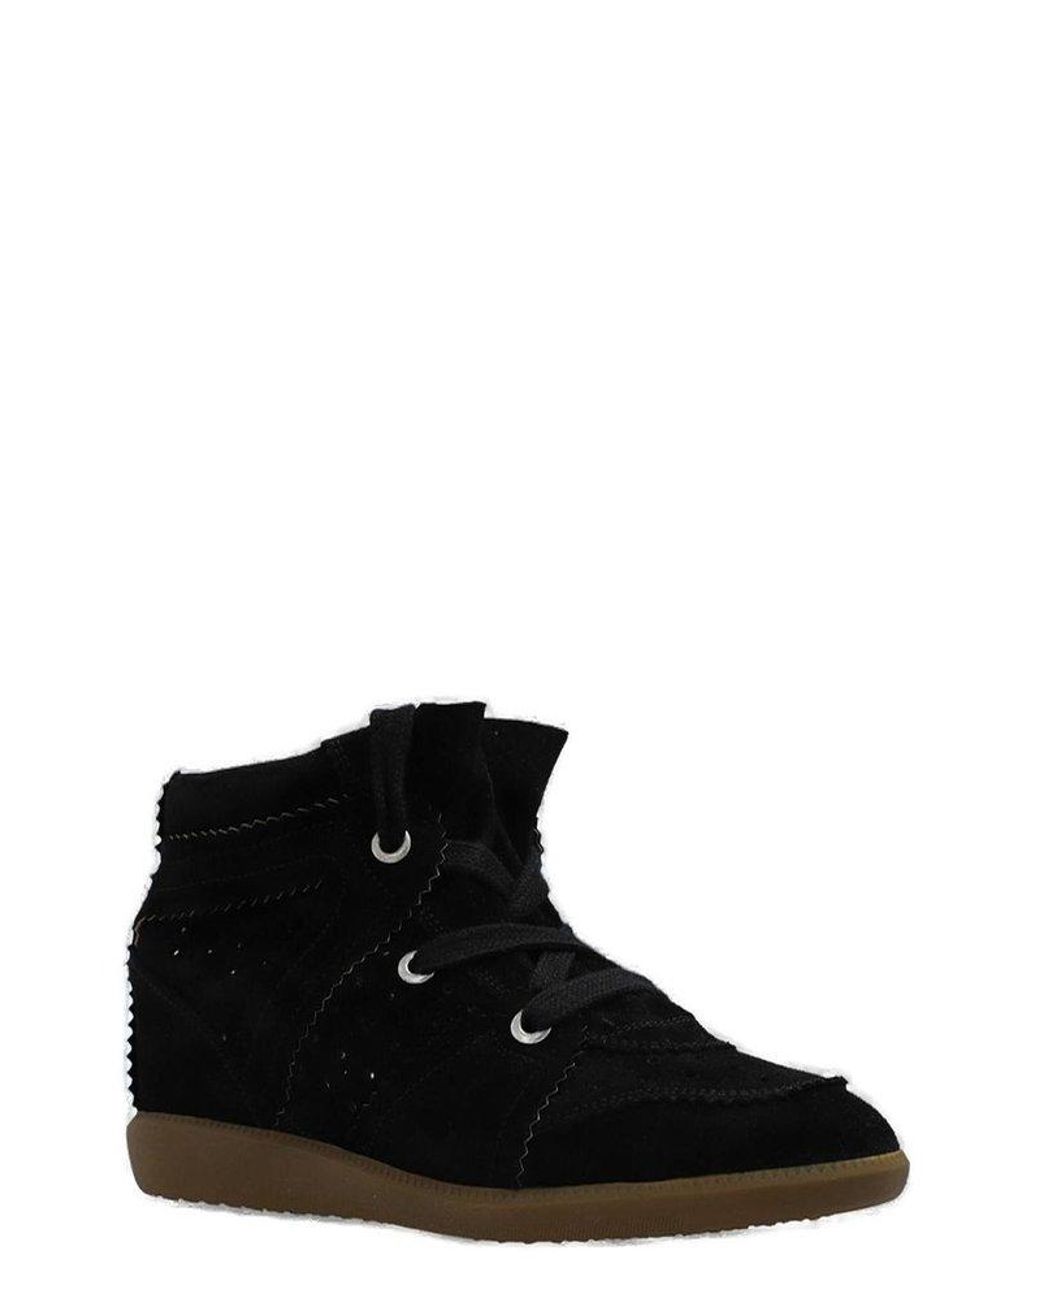 Isabel Marant Bobby Lace-up Wedge Sneakers in Black | Lyst